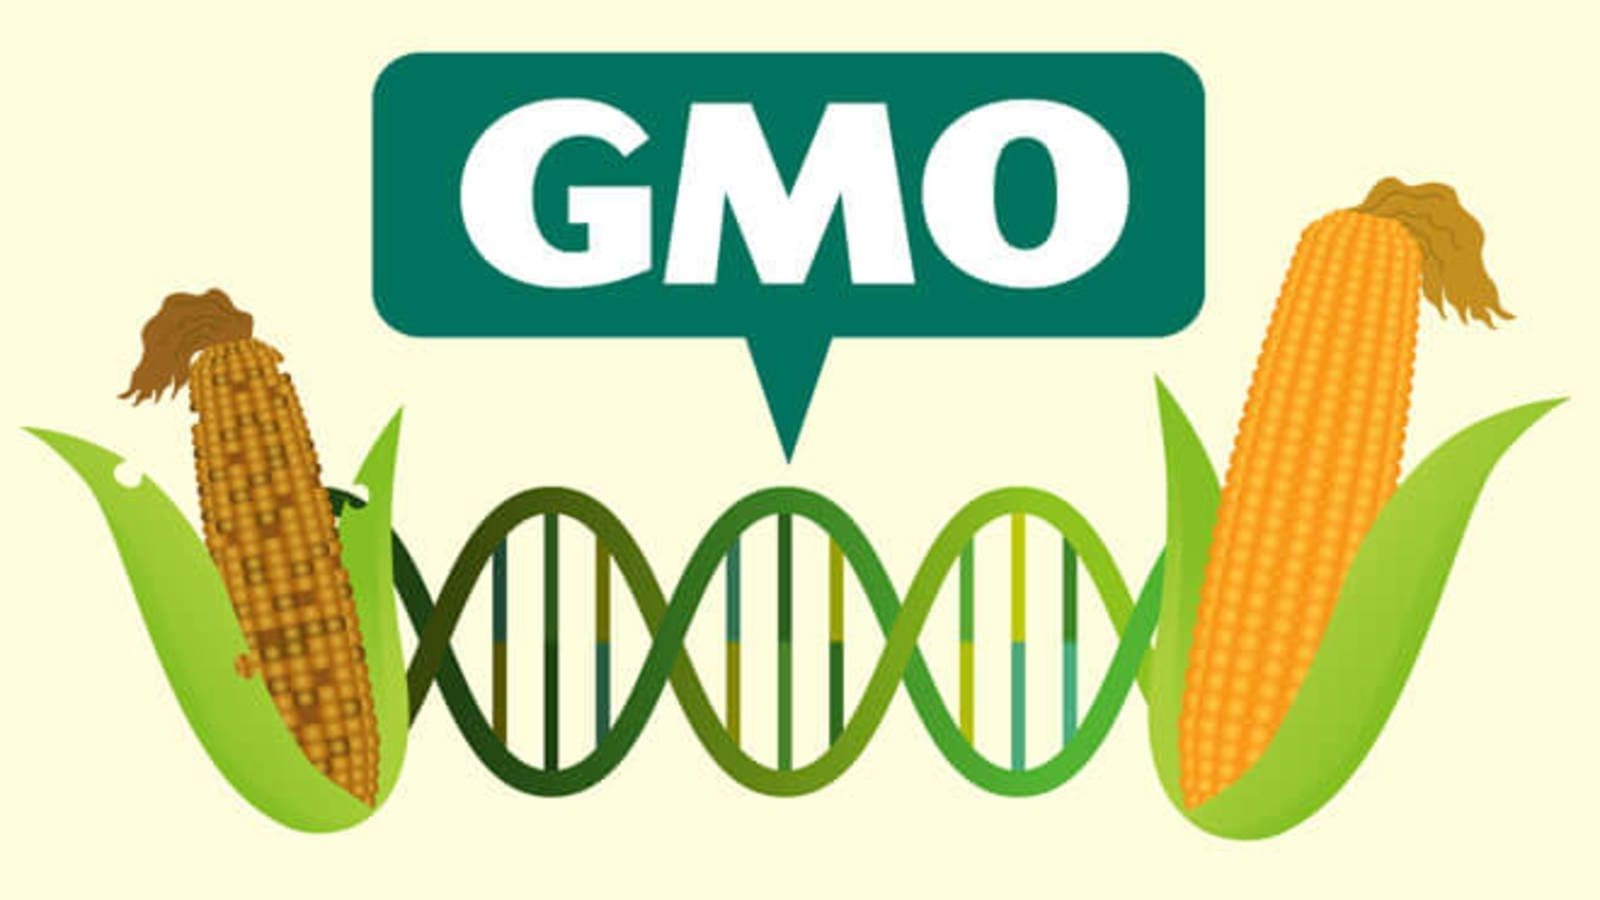 South African scientists call for increased GMO adoption in continent